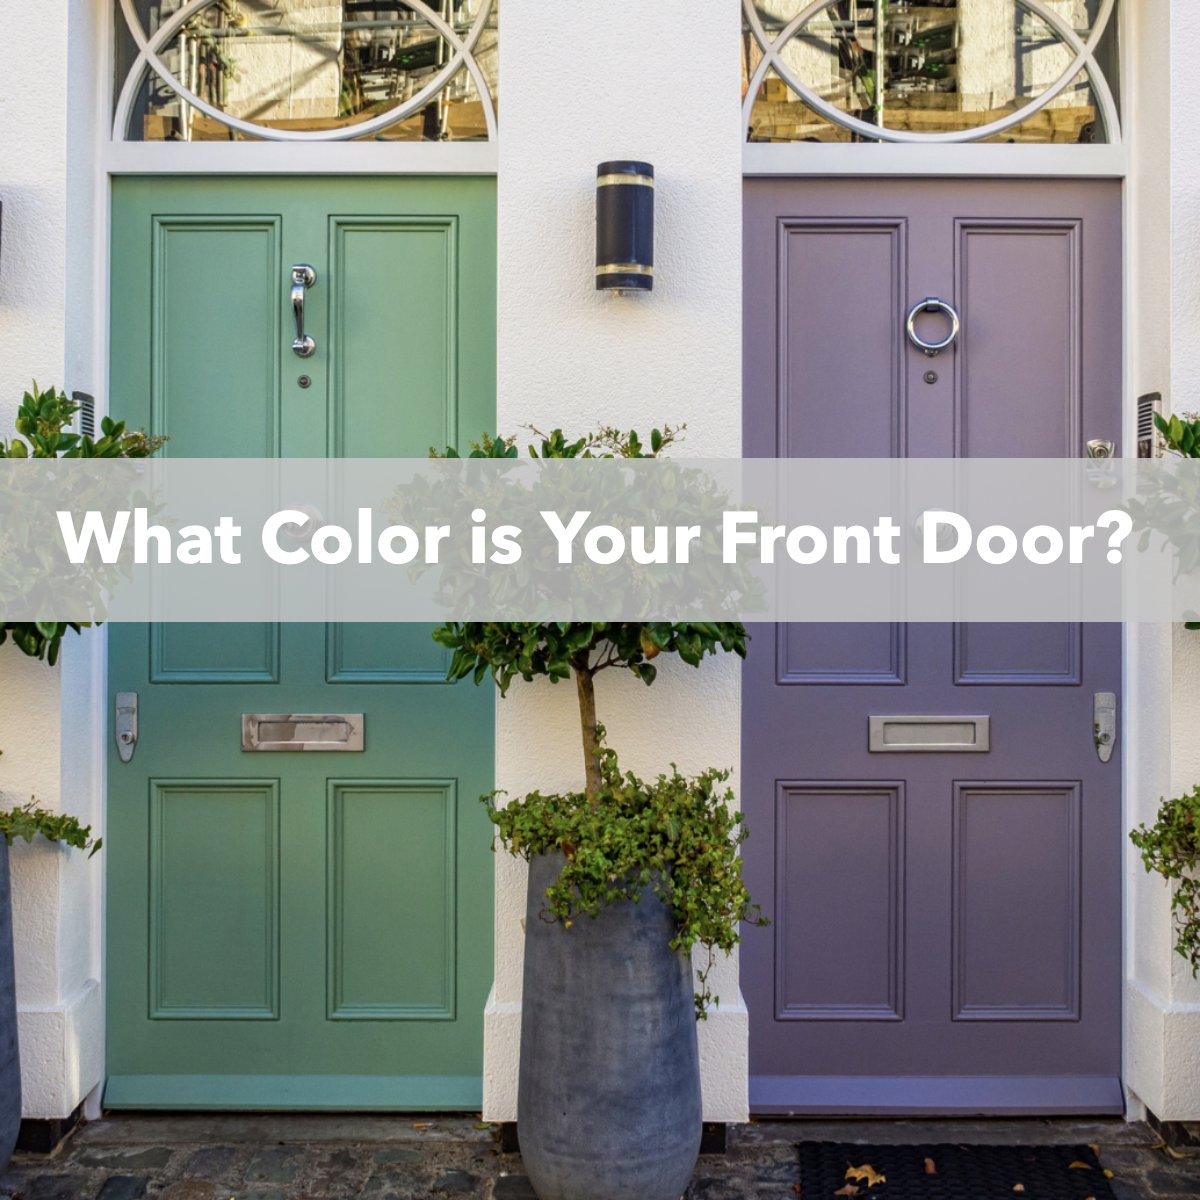 Did you select the color or did you just settle? 🤔

Tell us in the comments! 👇 

#questions #frontdoor #doorcolor #exterior #realestate